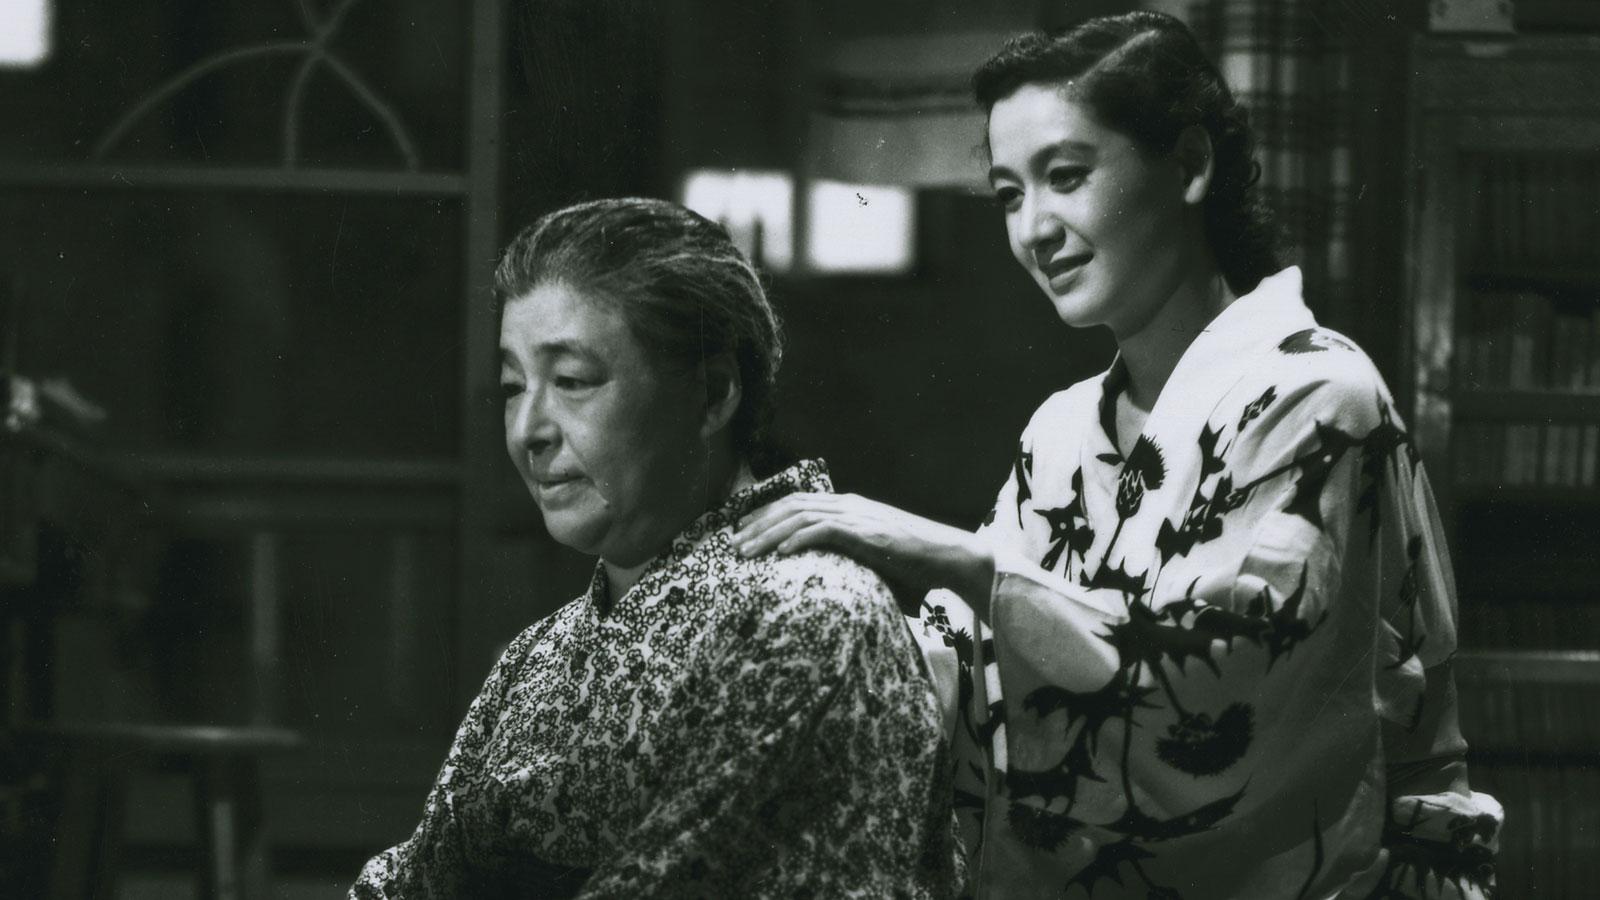 Scene from the film Tokyo Story